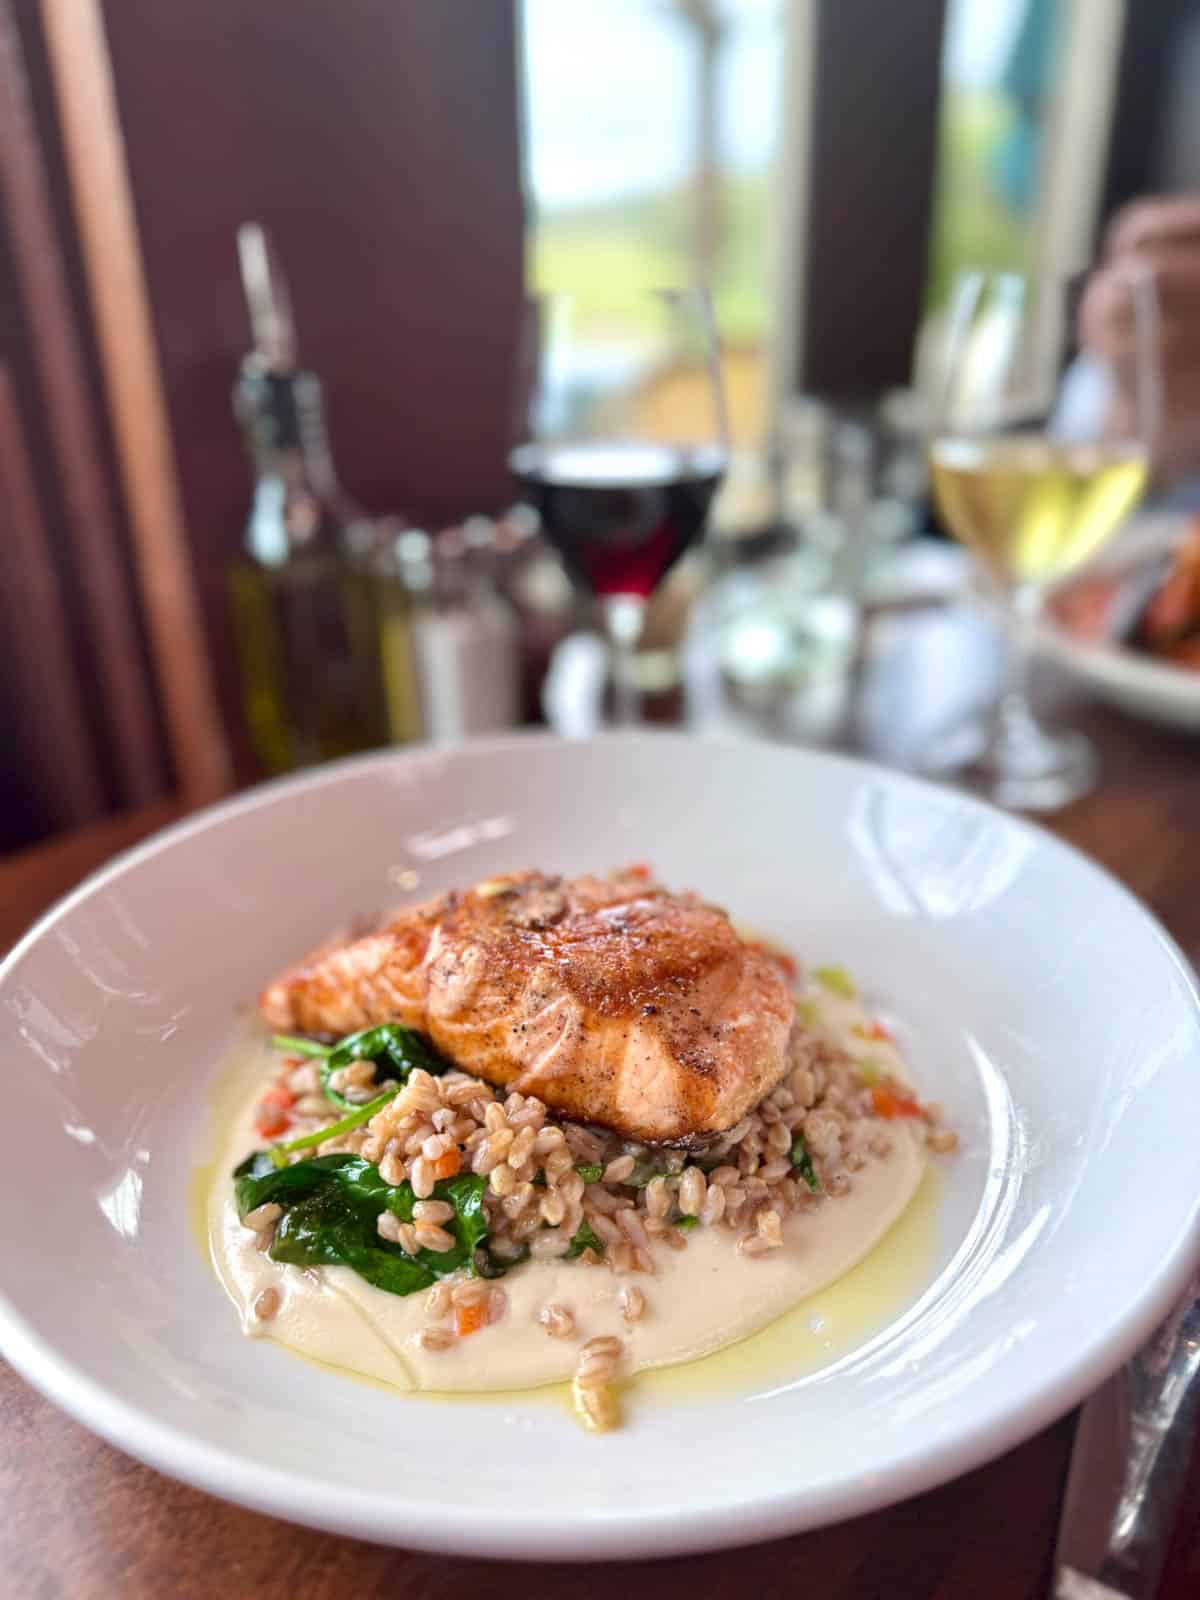 Salmon on top of grains and spinach with sauce.